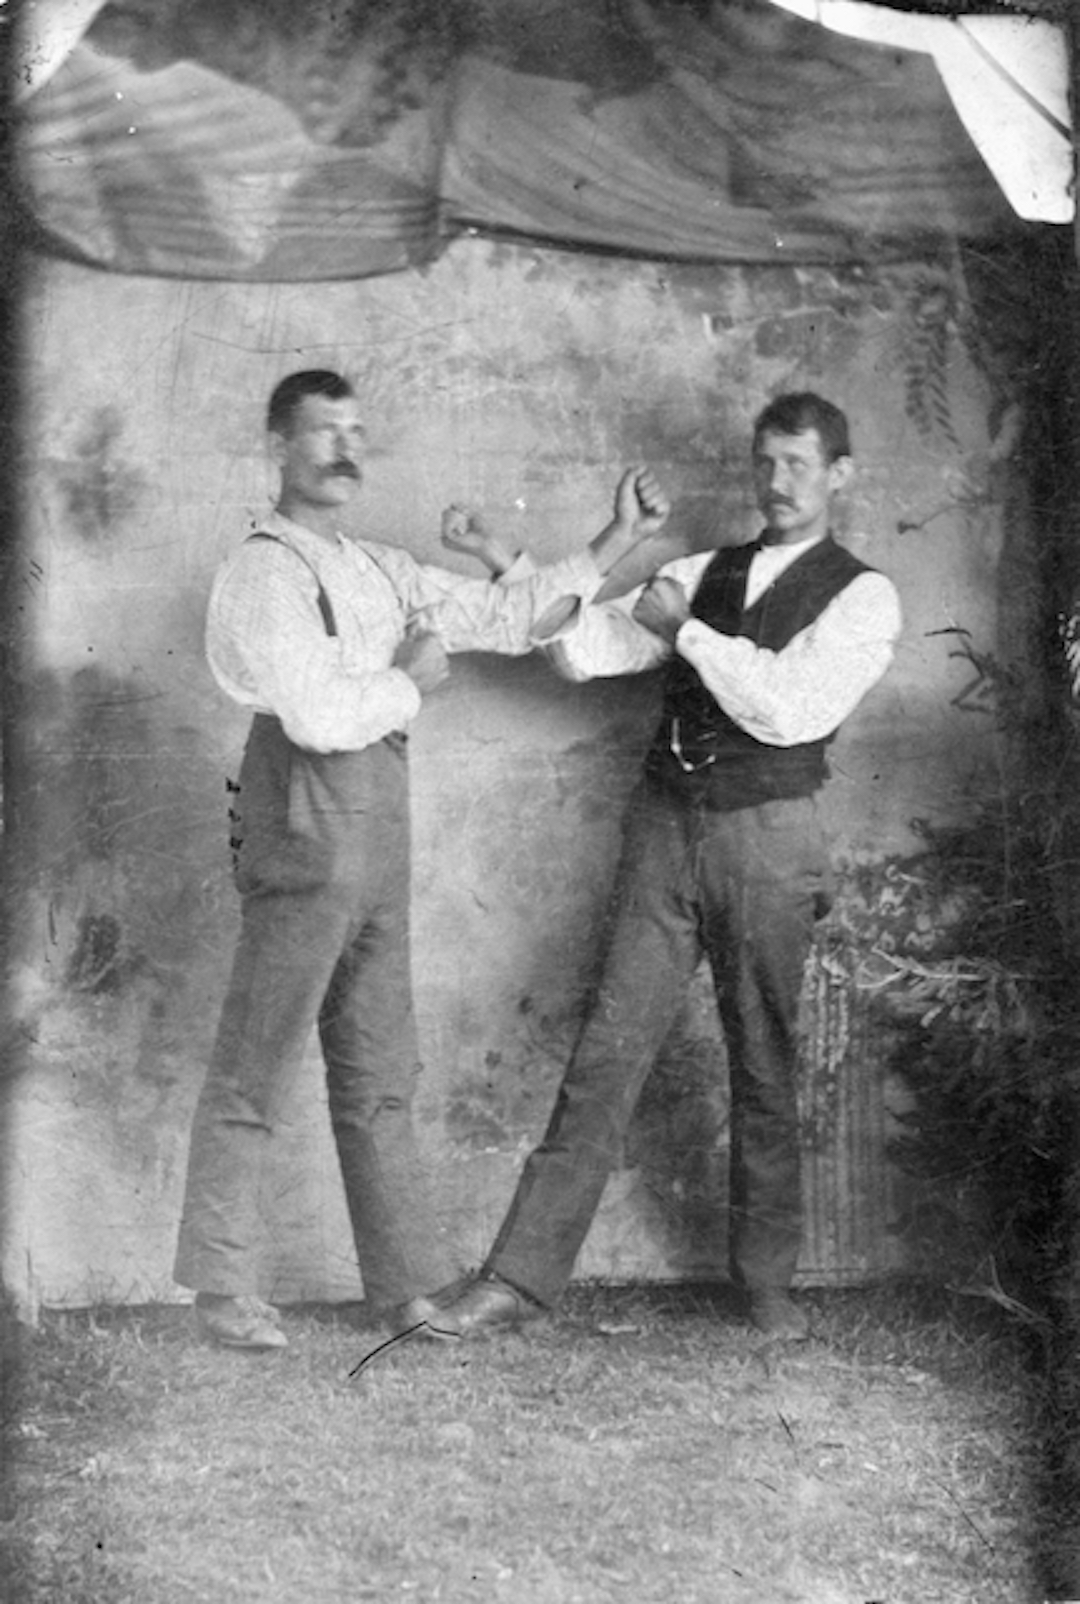 Knuckles Up! c1880s 2004.13.14 Even though Rat Portage was officially a town in 1881, it would have looked more like a work camp to the untrained eye. It was mostly occupied by young, single men who were here to work on the railway. During their down time these young men were always looking for things to do. One of the activities available in town at the time was having a picture taken. Young men would round up their pals and get a photo taken to send home or keep as a souvenir. The style of boxing pose in this photo was so common there is even a name for it: “The Fisticuffs Stance”. This stance became popular because it was used by fighters who fought under London Prize Ring Rules— the bareknuckle style of boxing that featured unlimited rounds, spiked shoes, and even some limited grappling. London Prize Ring Rules were banned in sanctioned matches in 1889 and were replaced with the Marquess of Queensberry Rules. These modern rules (mandatory gloves, 12-15 three minute rounds, standing eight count) made the traditional fisticuffs stance obsolete. A modern variation of the “fisticuffs pose”can sometimes be seen at MMA and boxing weigh-in events. Photographer unknown. From the collection of The Muse - Lake of the Woods Museum in Kenora, Ontario, Canada. Displayed as part of the exhibition, "Strike a Pose: Portraits from the Collection." November 17, 2020 - March 27, 2021.